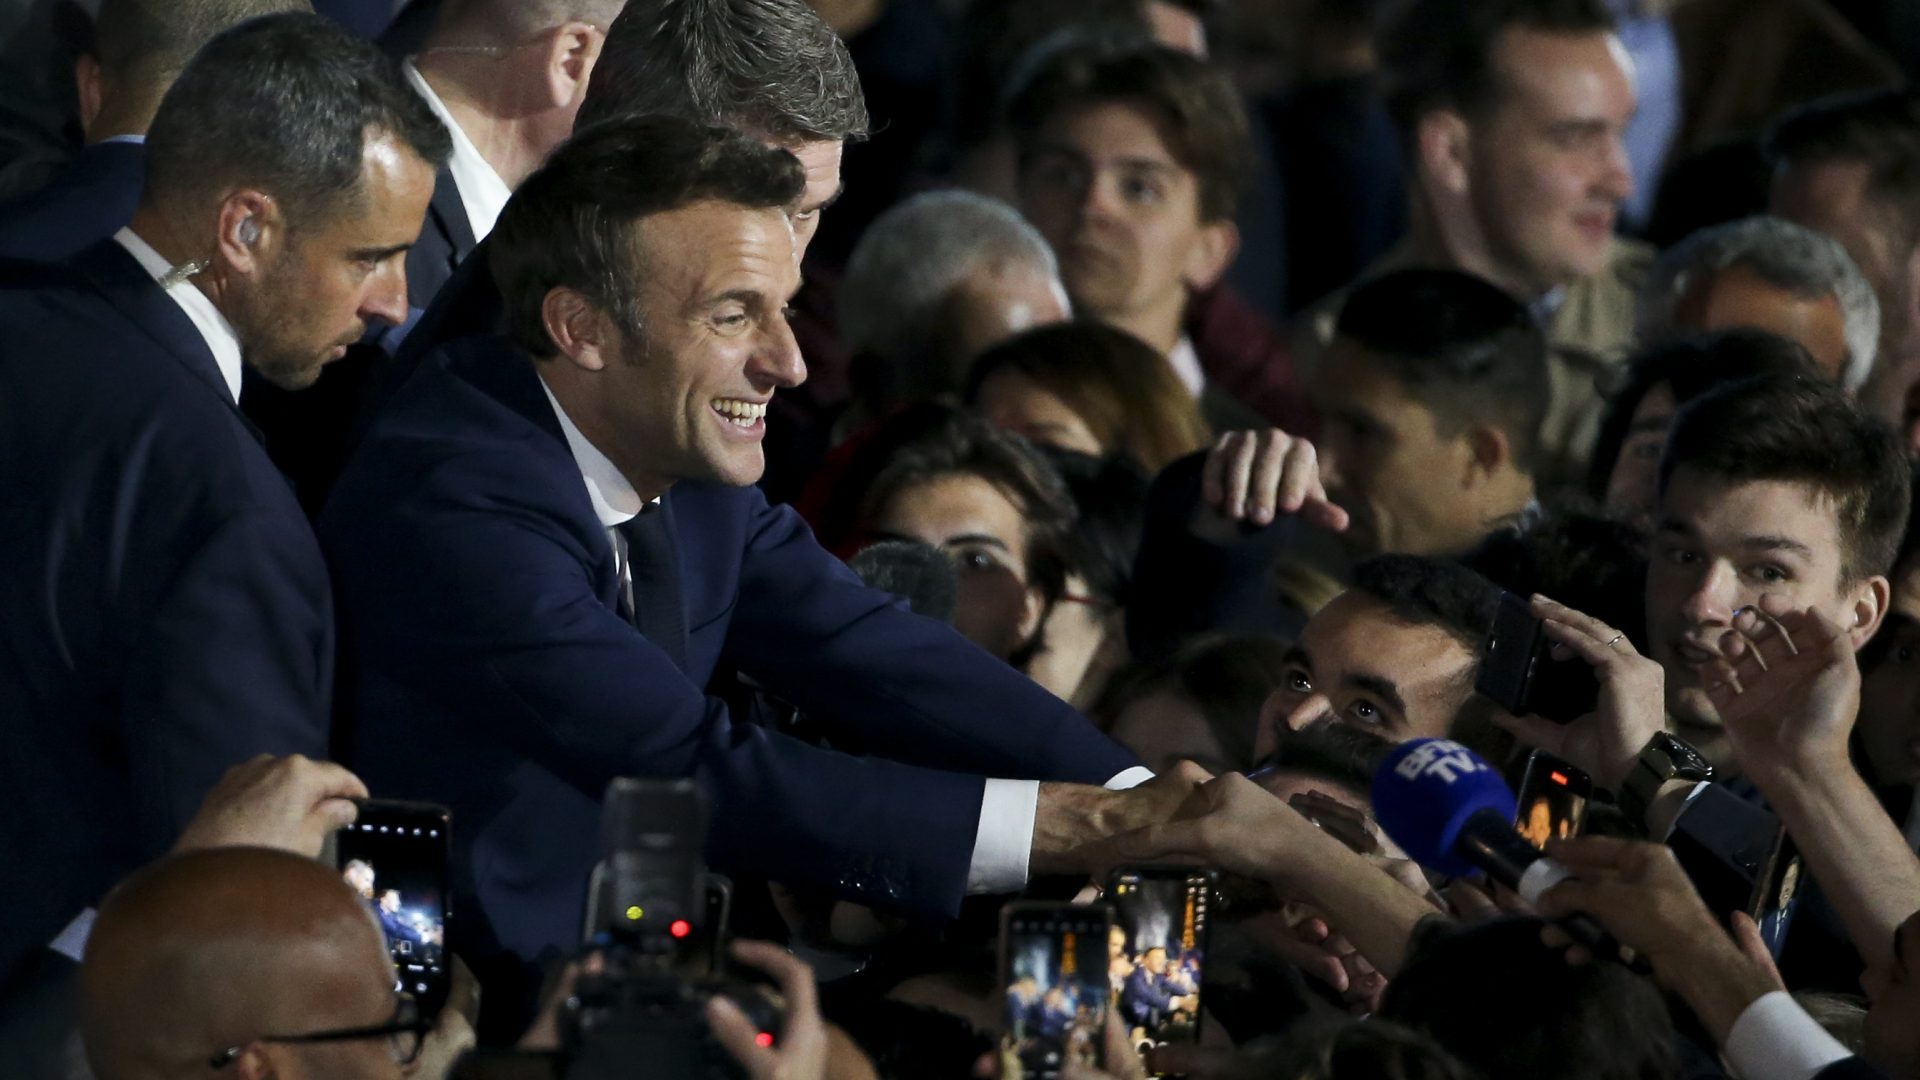 French President Emmanuel Macron celebrates his re-election. Photo: Jean Catuffe/Getty Images